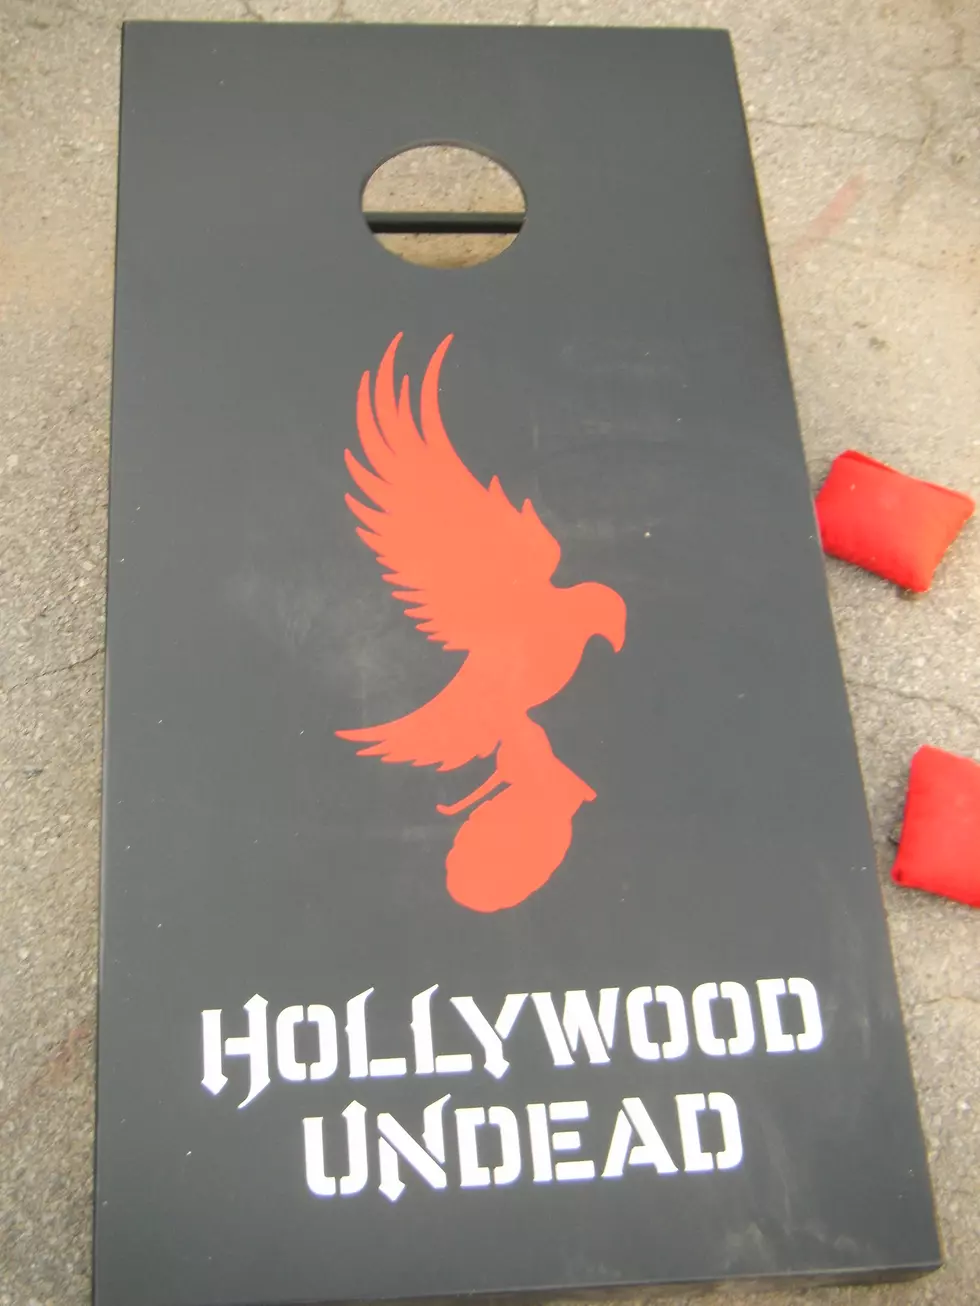 Winners Get Cornhole&#8217;d With Hollywood Undead! [Photos]